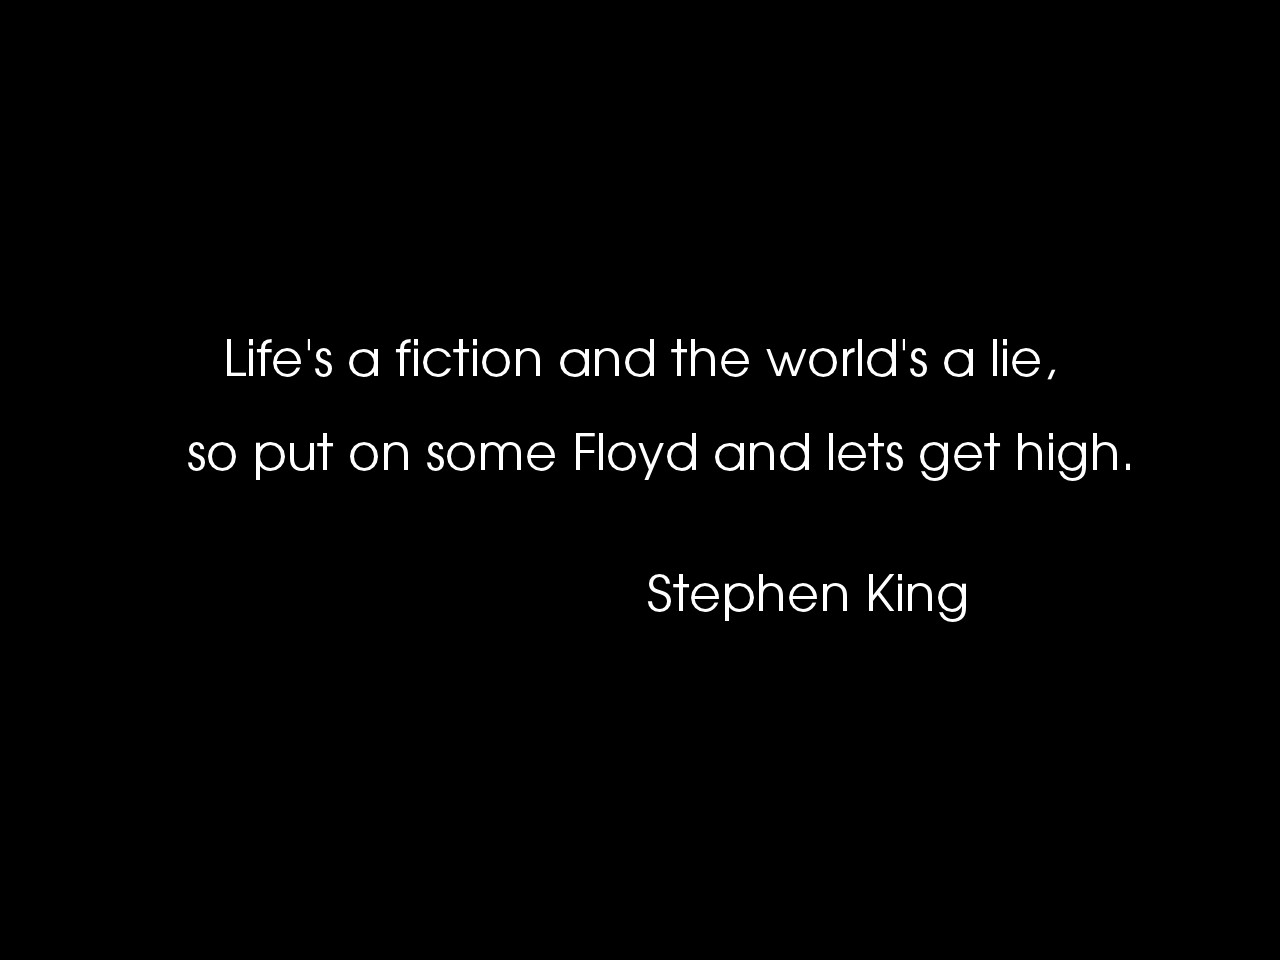 quotes stephen king 1280x960 wallpaper High Quality Wallpaper, High Definition Wallpaper